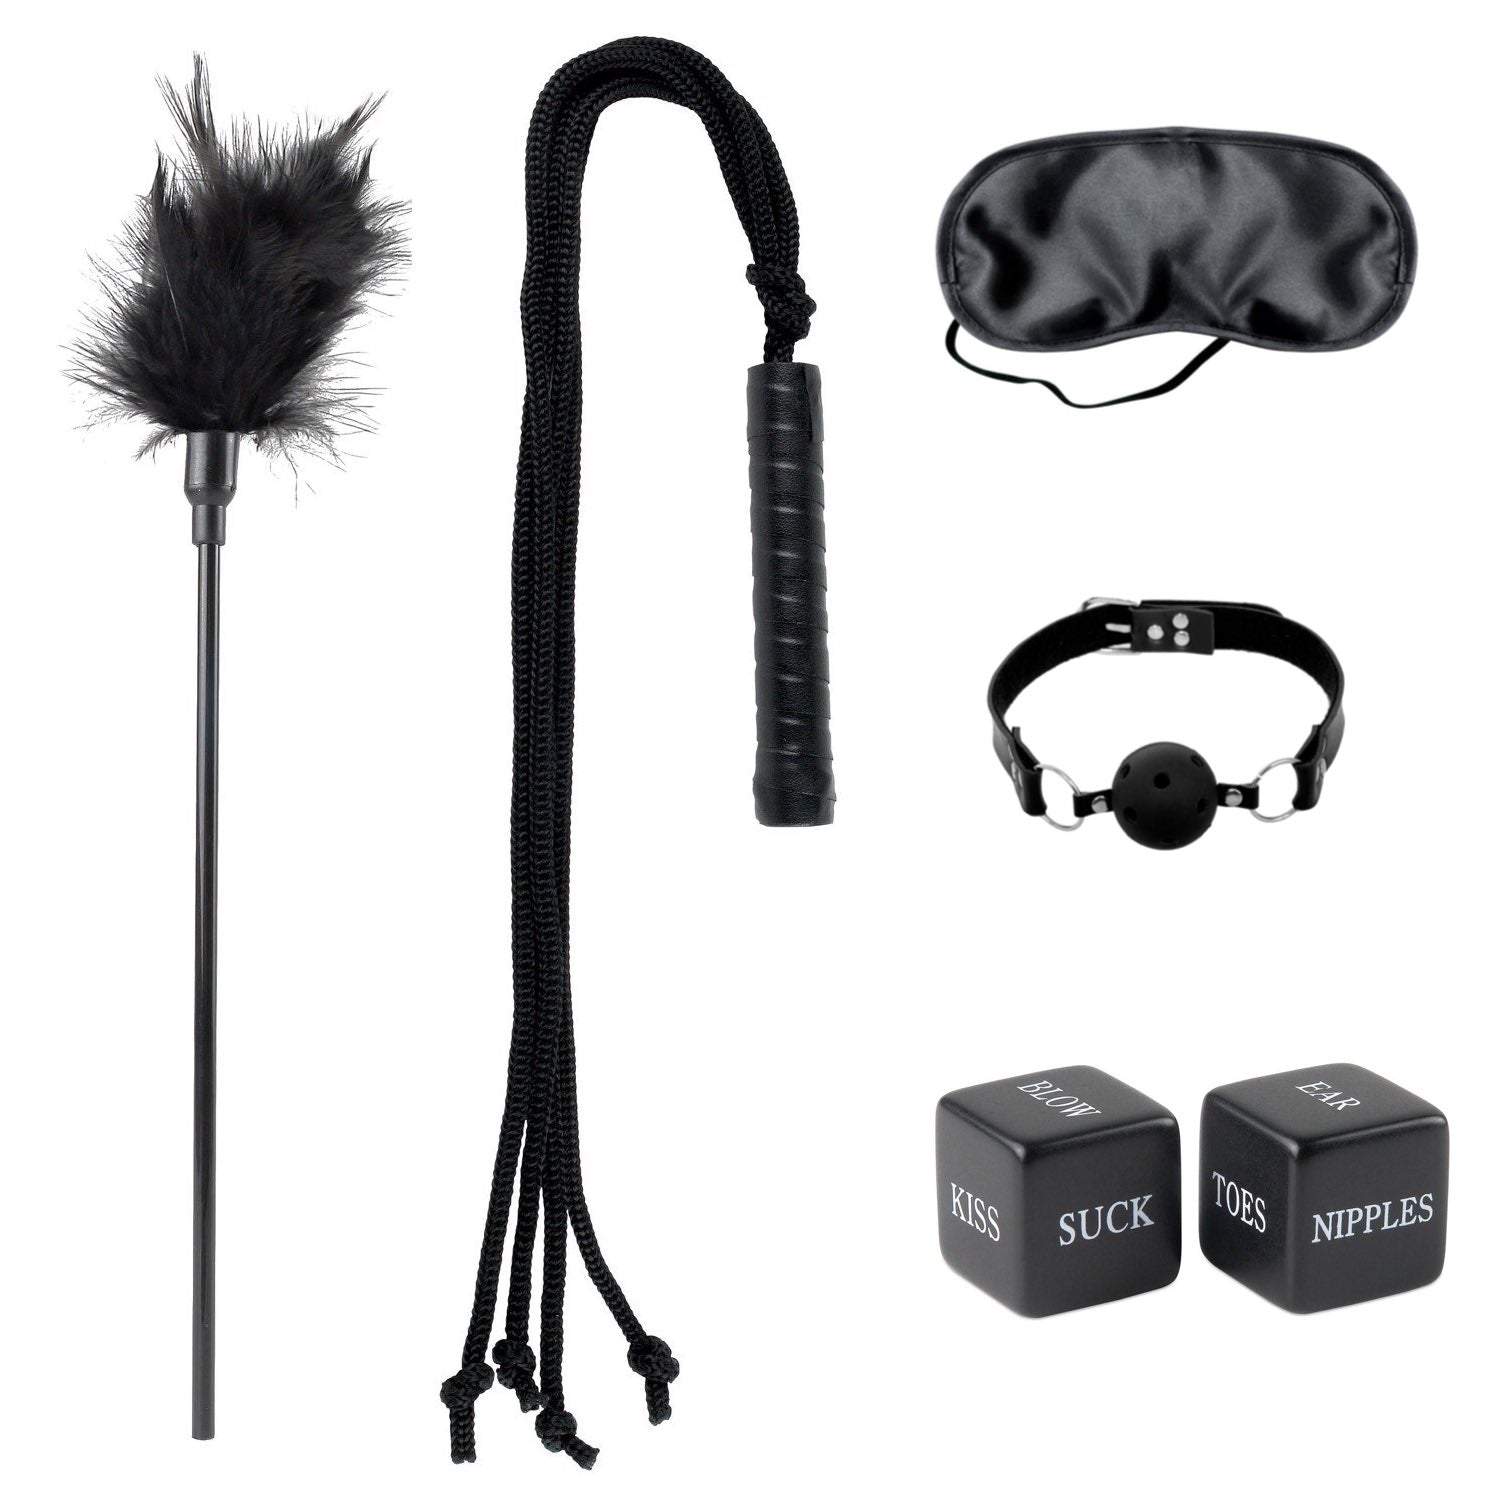 Fetish Fantasy Series Limited Edition First Time Fantasy Kit - Black Bondage Kit - 5 Piece Set by Pipedream